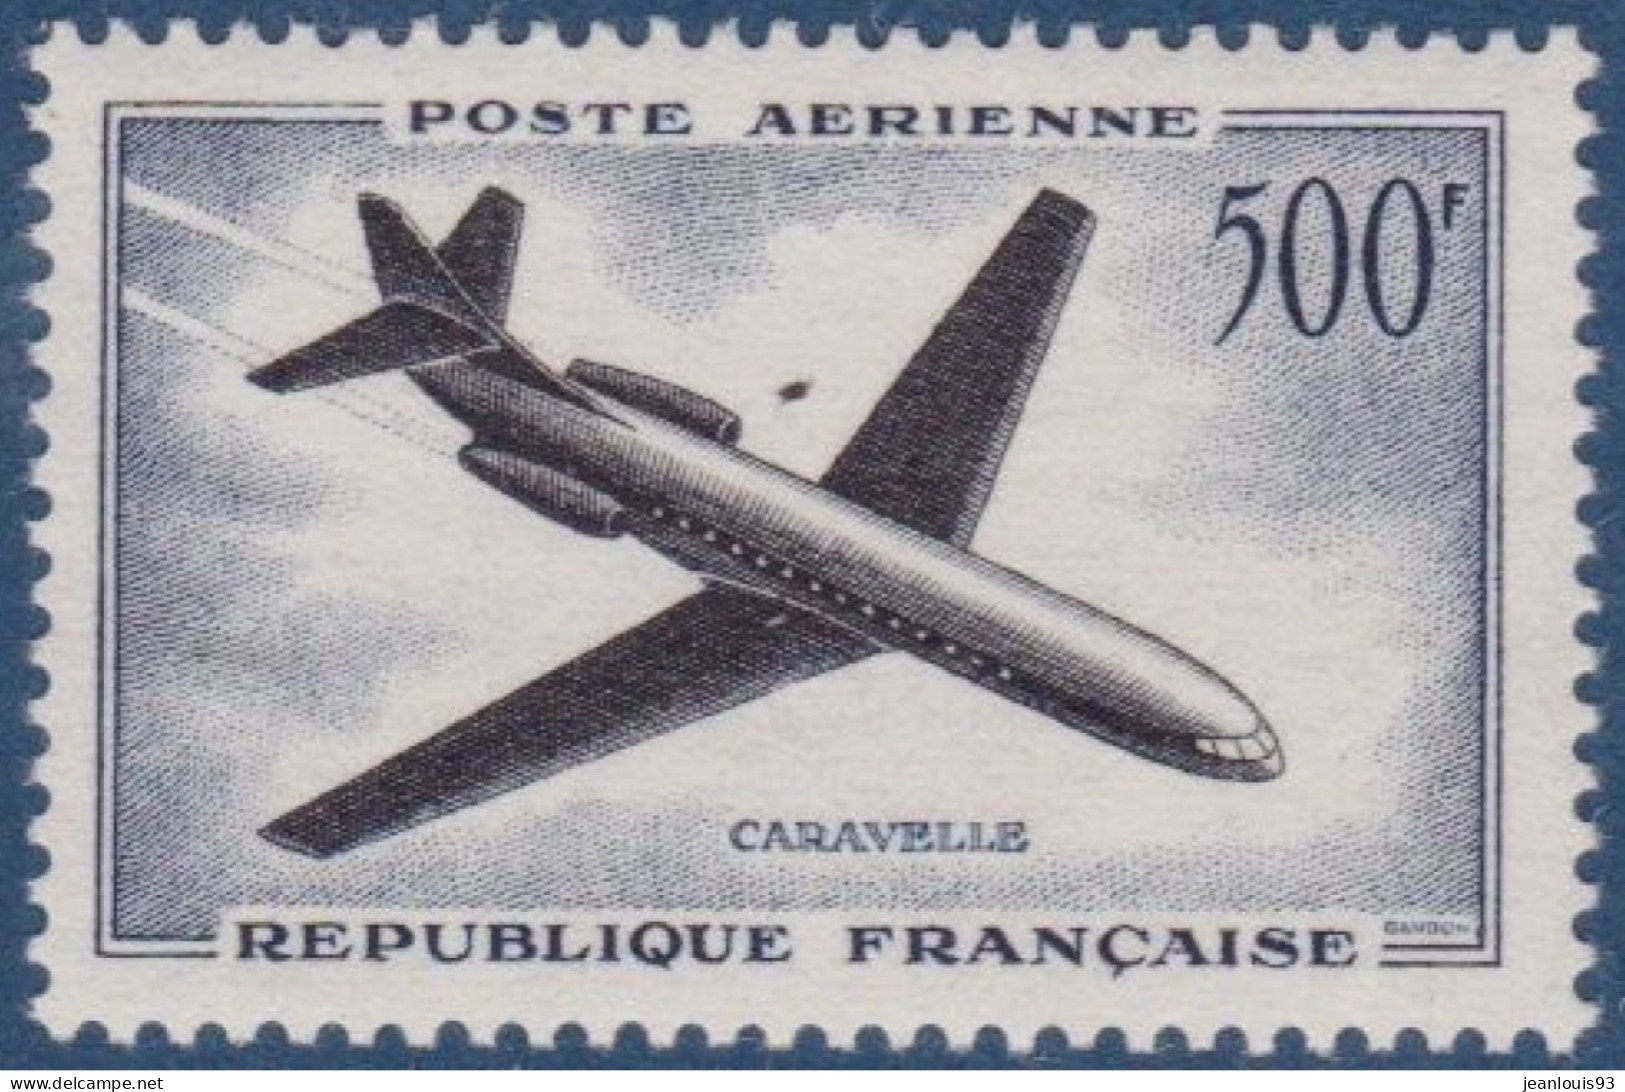 FRANCE - PA 36  CARAVELLE 500F NEUF AVEC CHARNIERE PROPRE COTE 23 EUR - 1927-1959 Mint/hinged